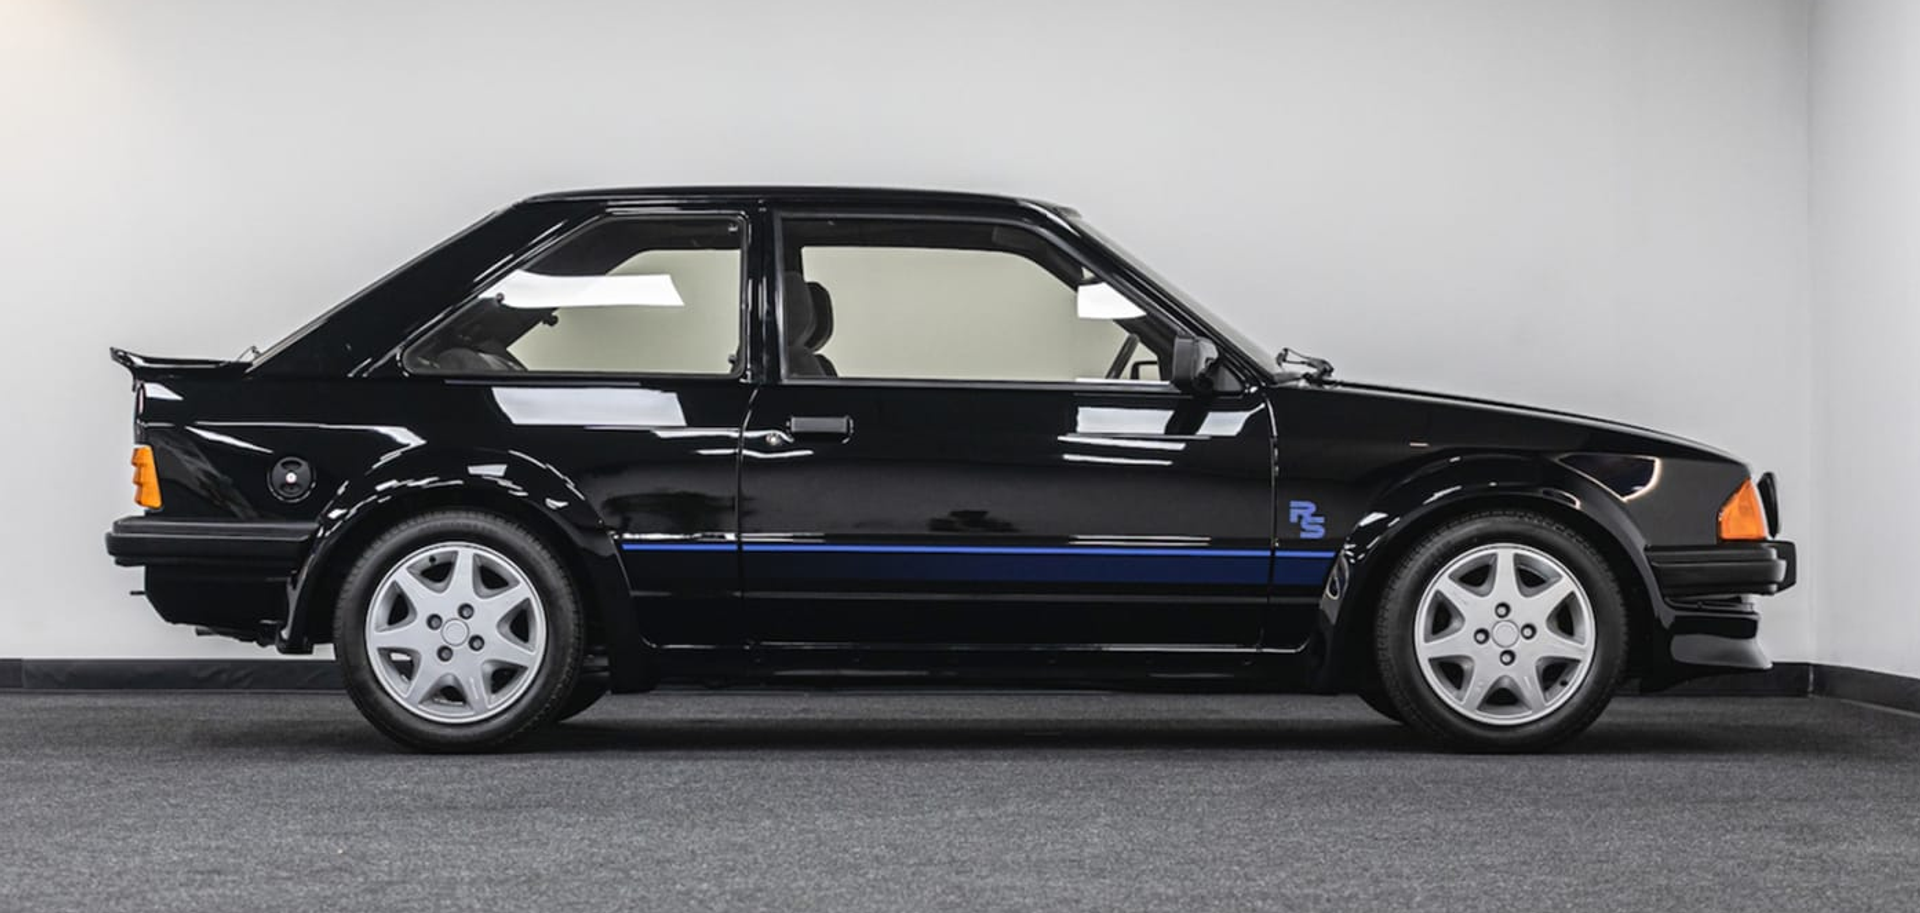 The 1985 Ford Escort RS Turbo previously owned by Diana, Princess of Wales, on display at the Silverstone Race Circuit near Towcester, Northamptonshire, England before it goes up for auction. August 27, 2022. - Sputnik International, 1920, 28.08.2022